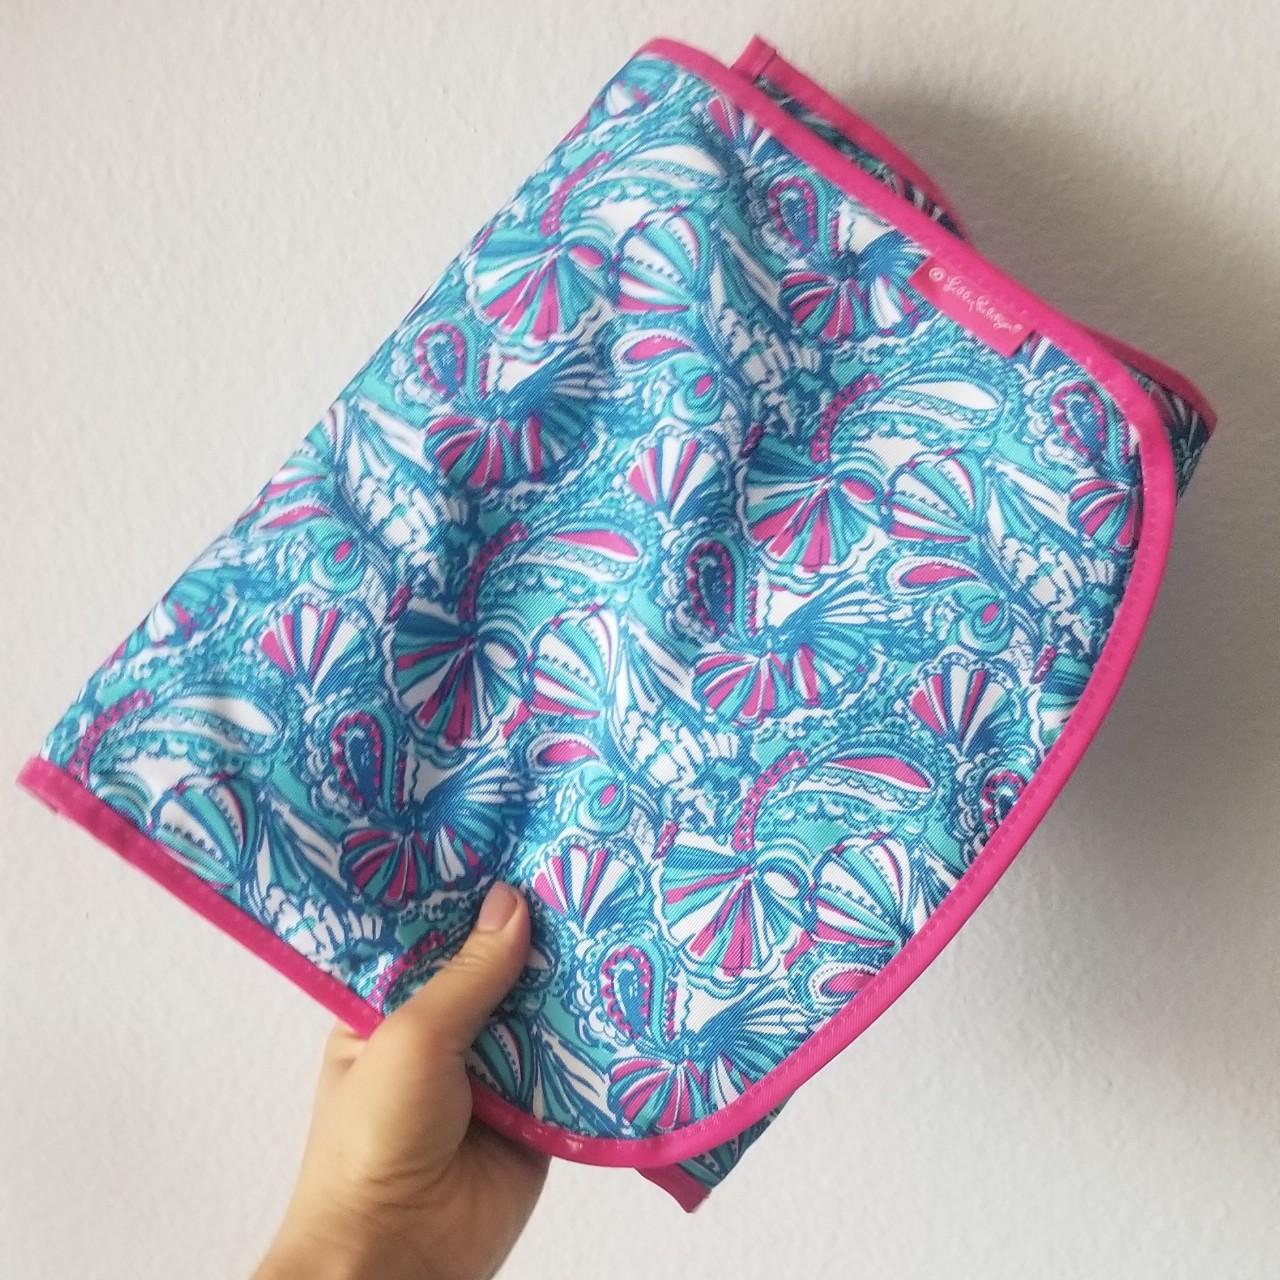 Lilly Pulitzer Women's Blue and Pink Bag (3)